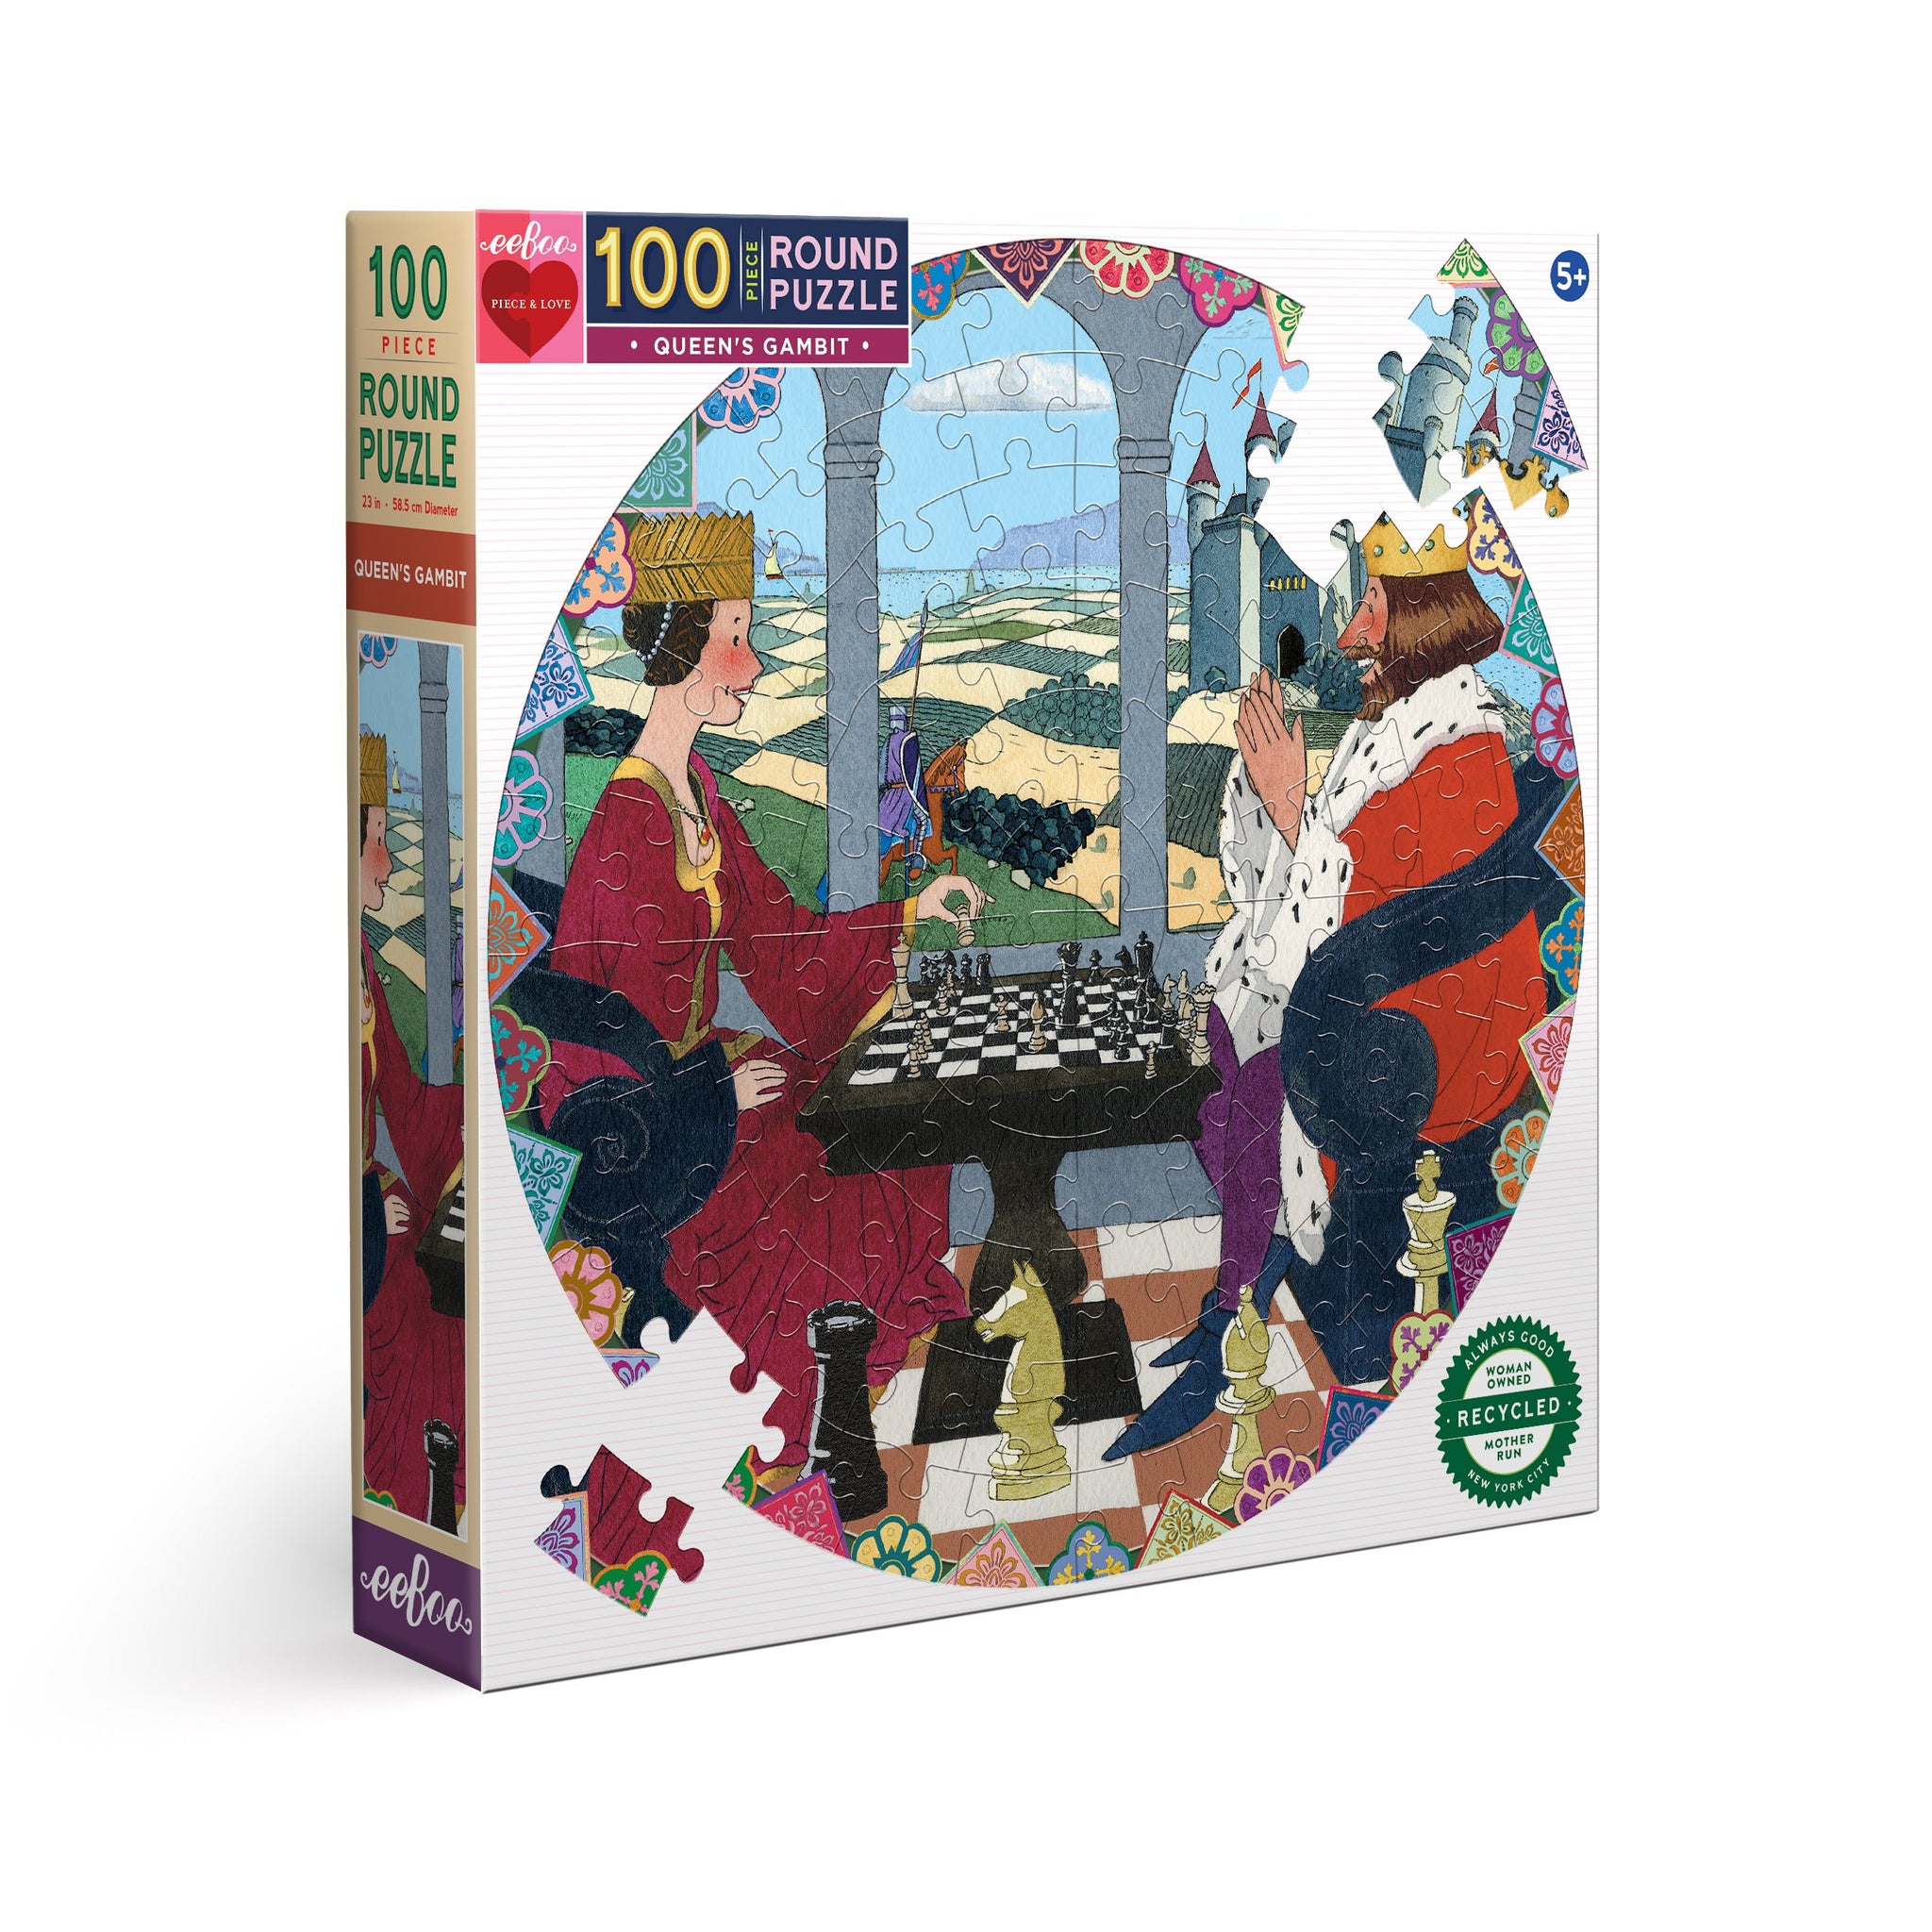 eeBoo 100pc Puzzle Queens Gambit Round The Toy Wagon 